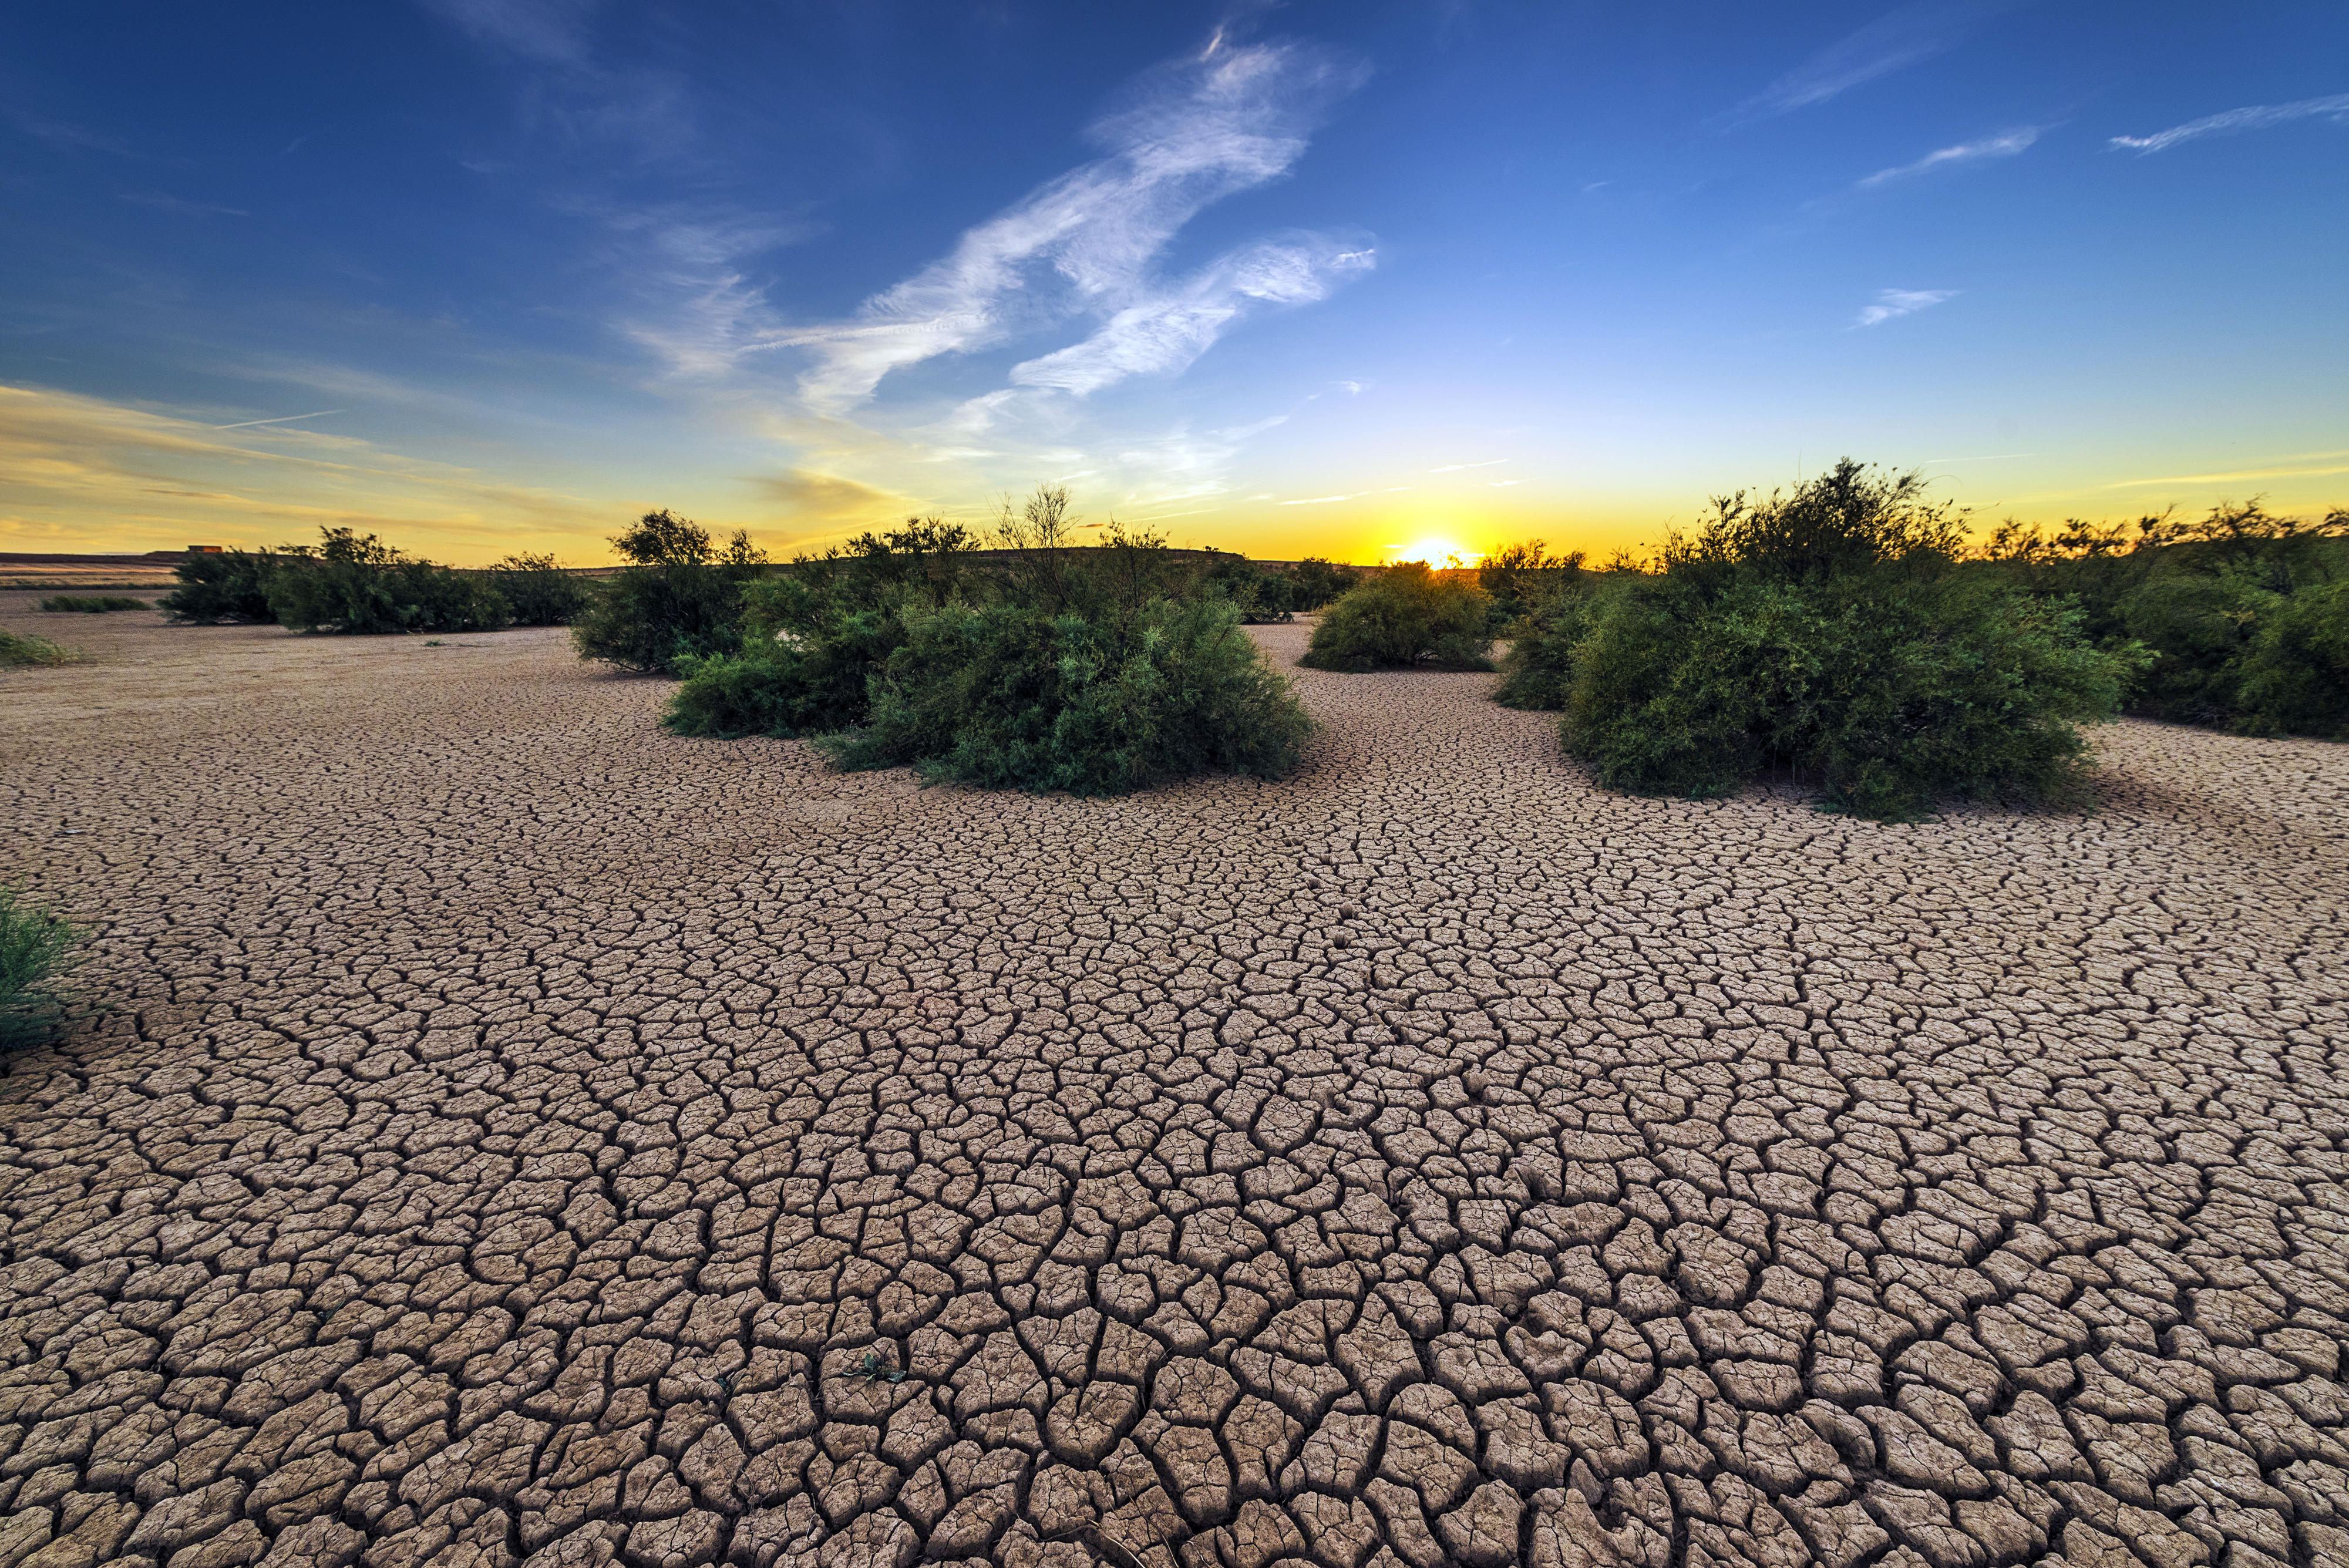 Water scarcity and drought are among the serious consequences of climate change.